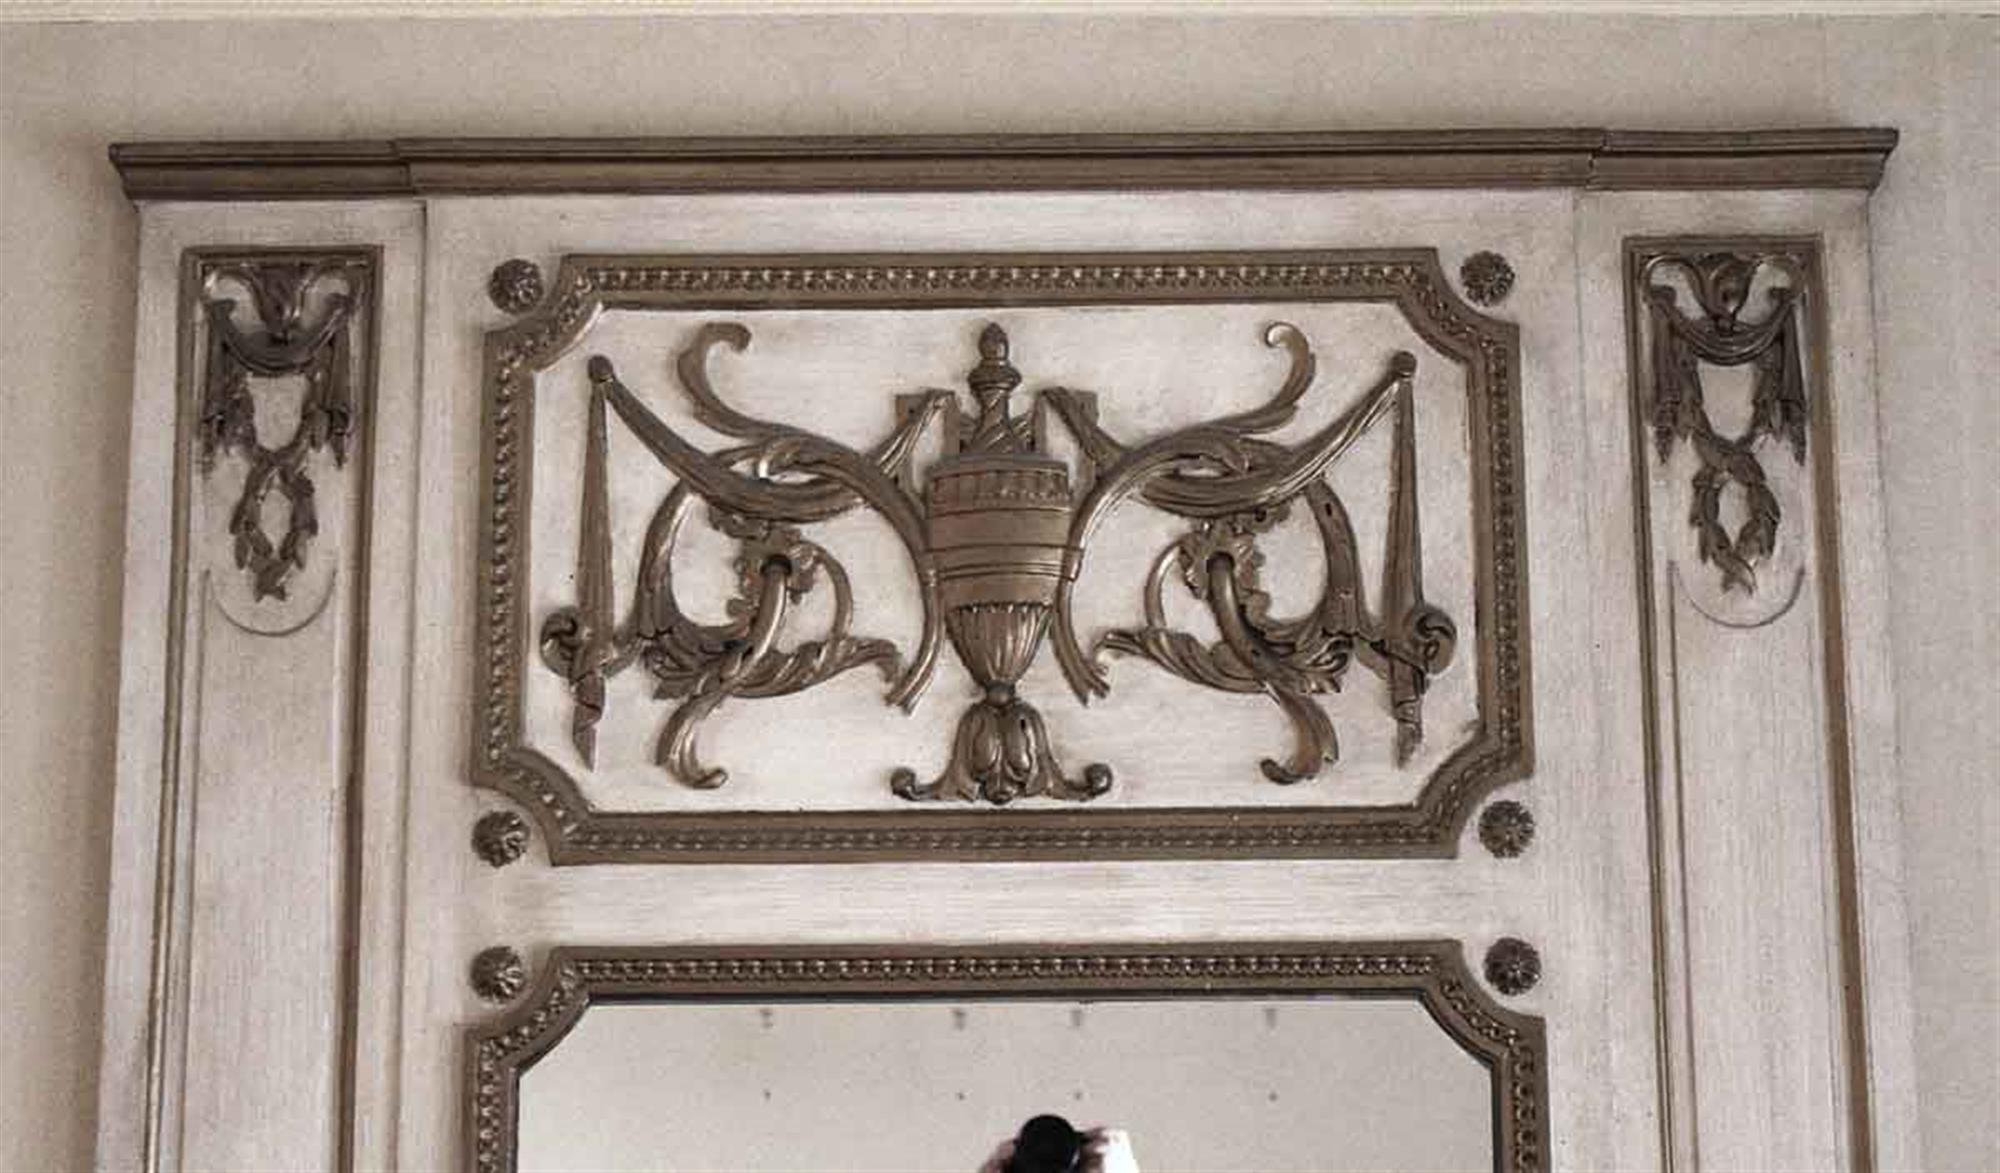 1931 decorative white wooden over mantel mirror with carved details and an urn in the top center. Original to Room 1064 of the NYC Waldorf Astoria Hotel. Waldorf Astoria authenticity card included with your purchase. This can be seen at our 333 West